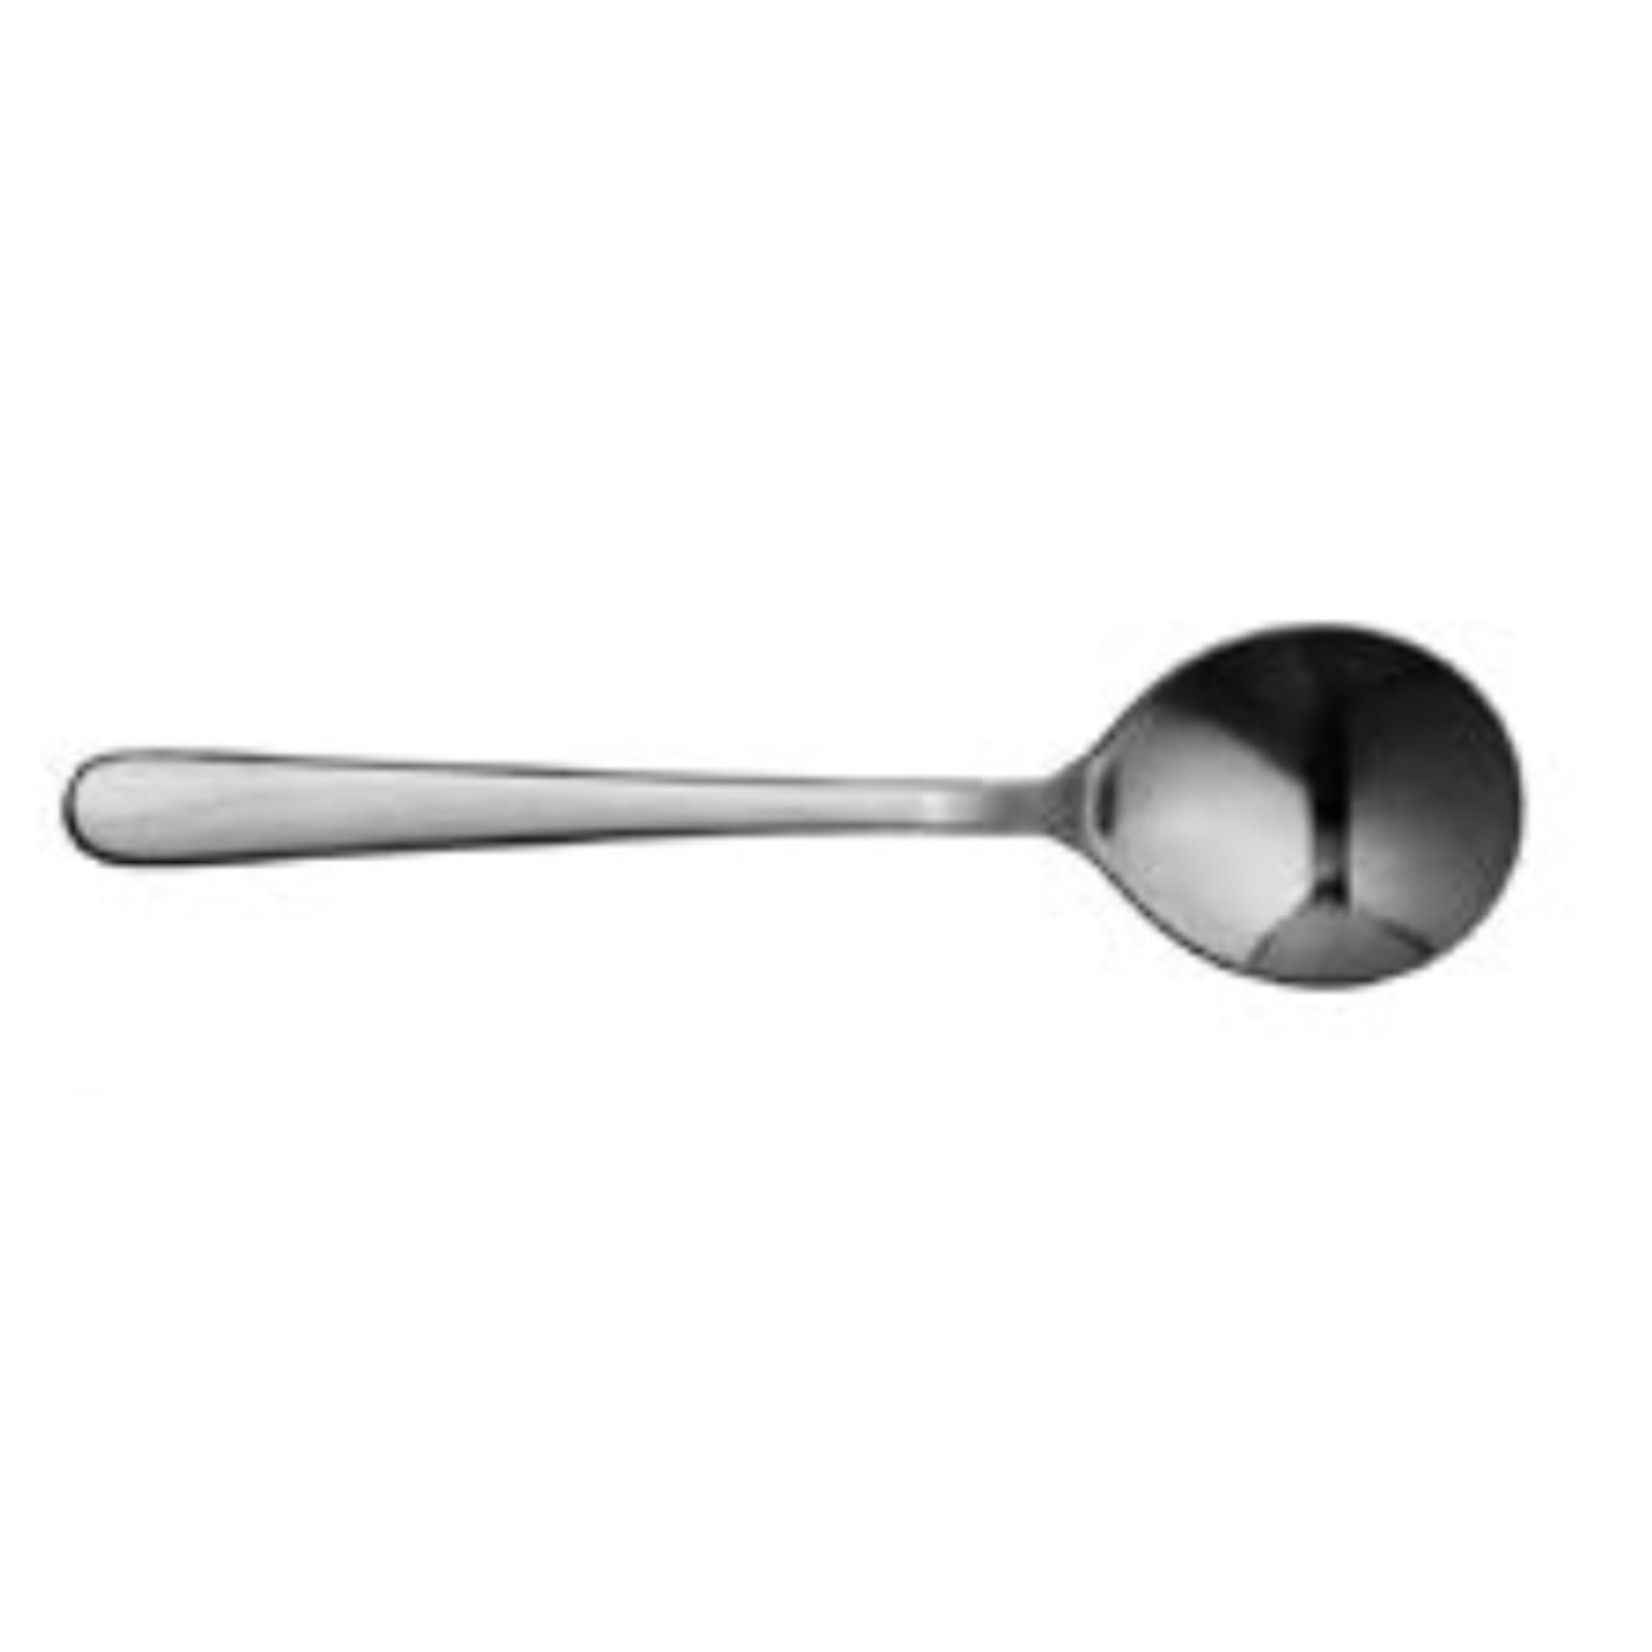 PUDDIFOOT PUDDIFOOT Eco Round Cream Soup Spoon